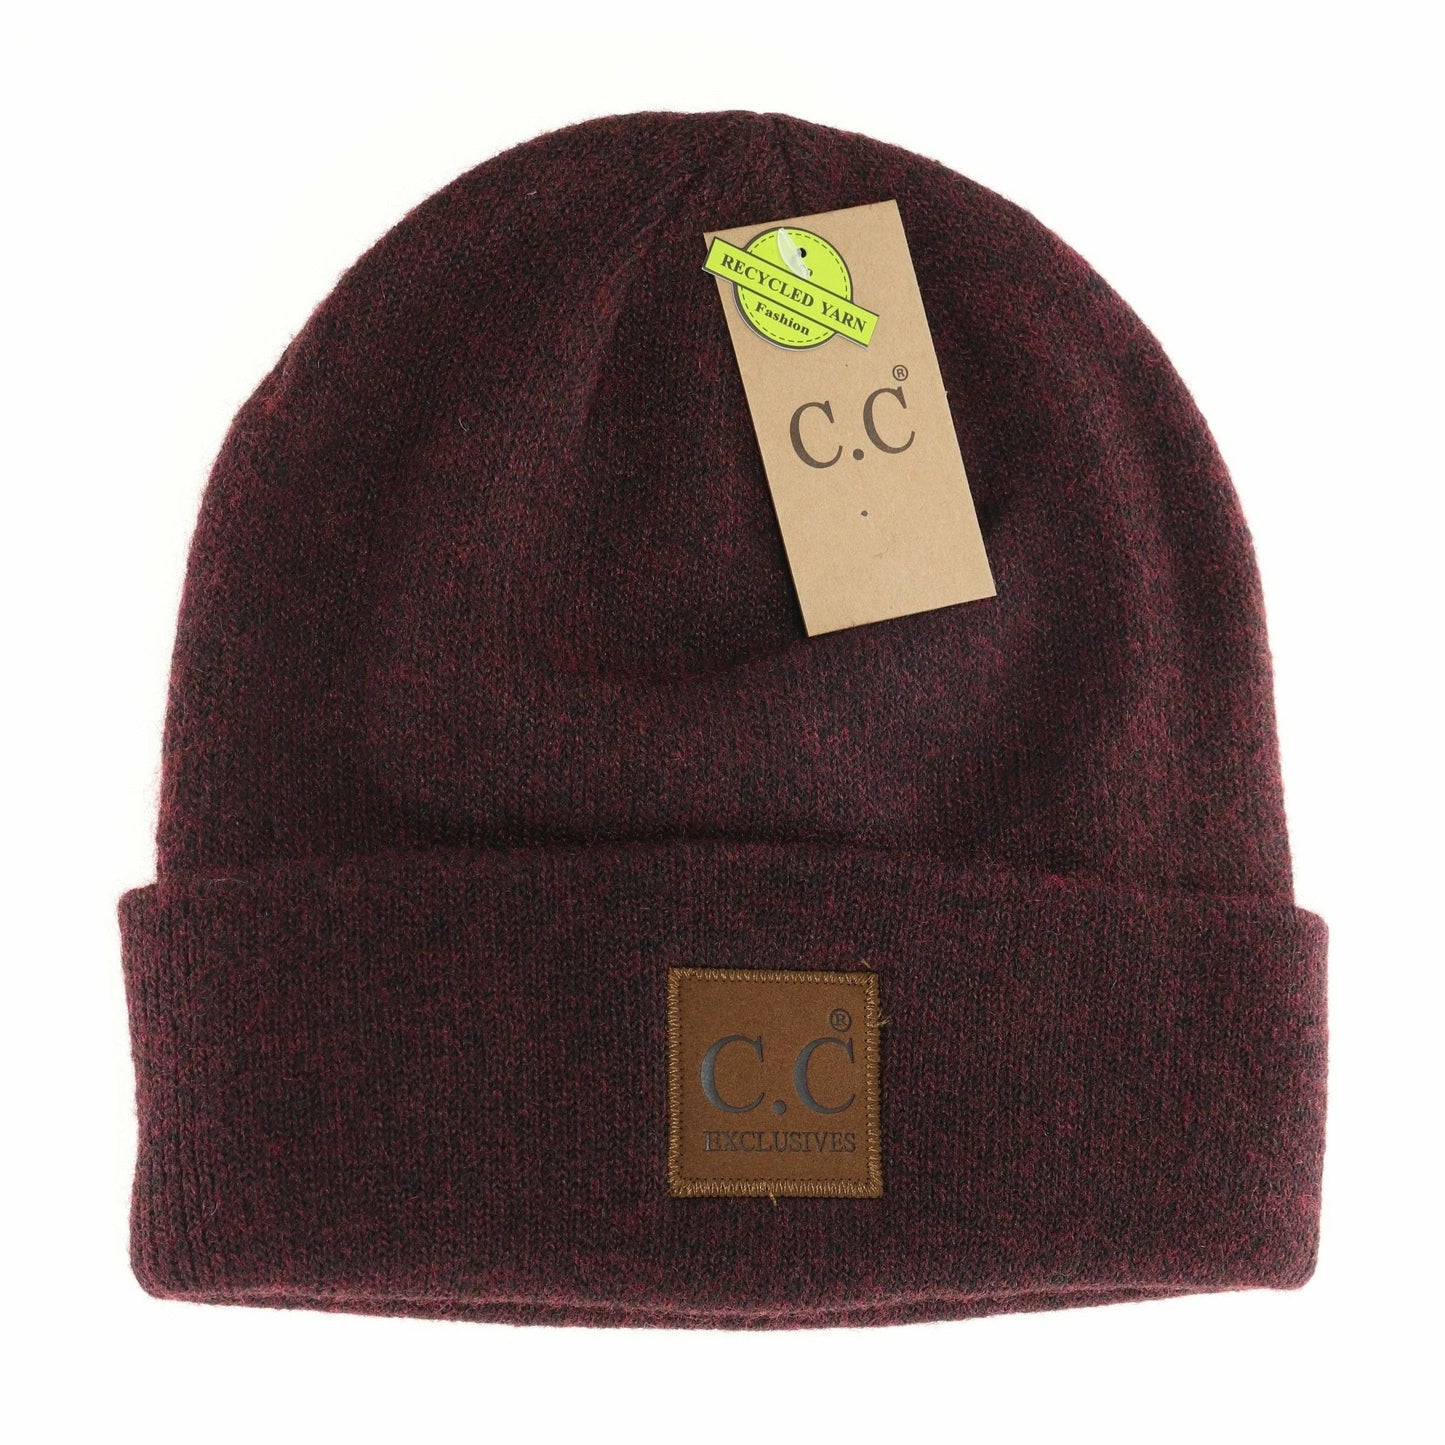 Lt Grey Unisex Soft Ribbed Leather Patch C.C. Beanie